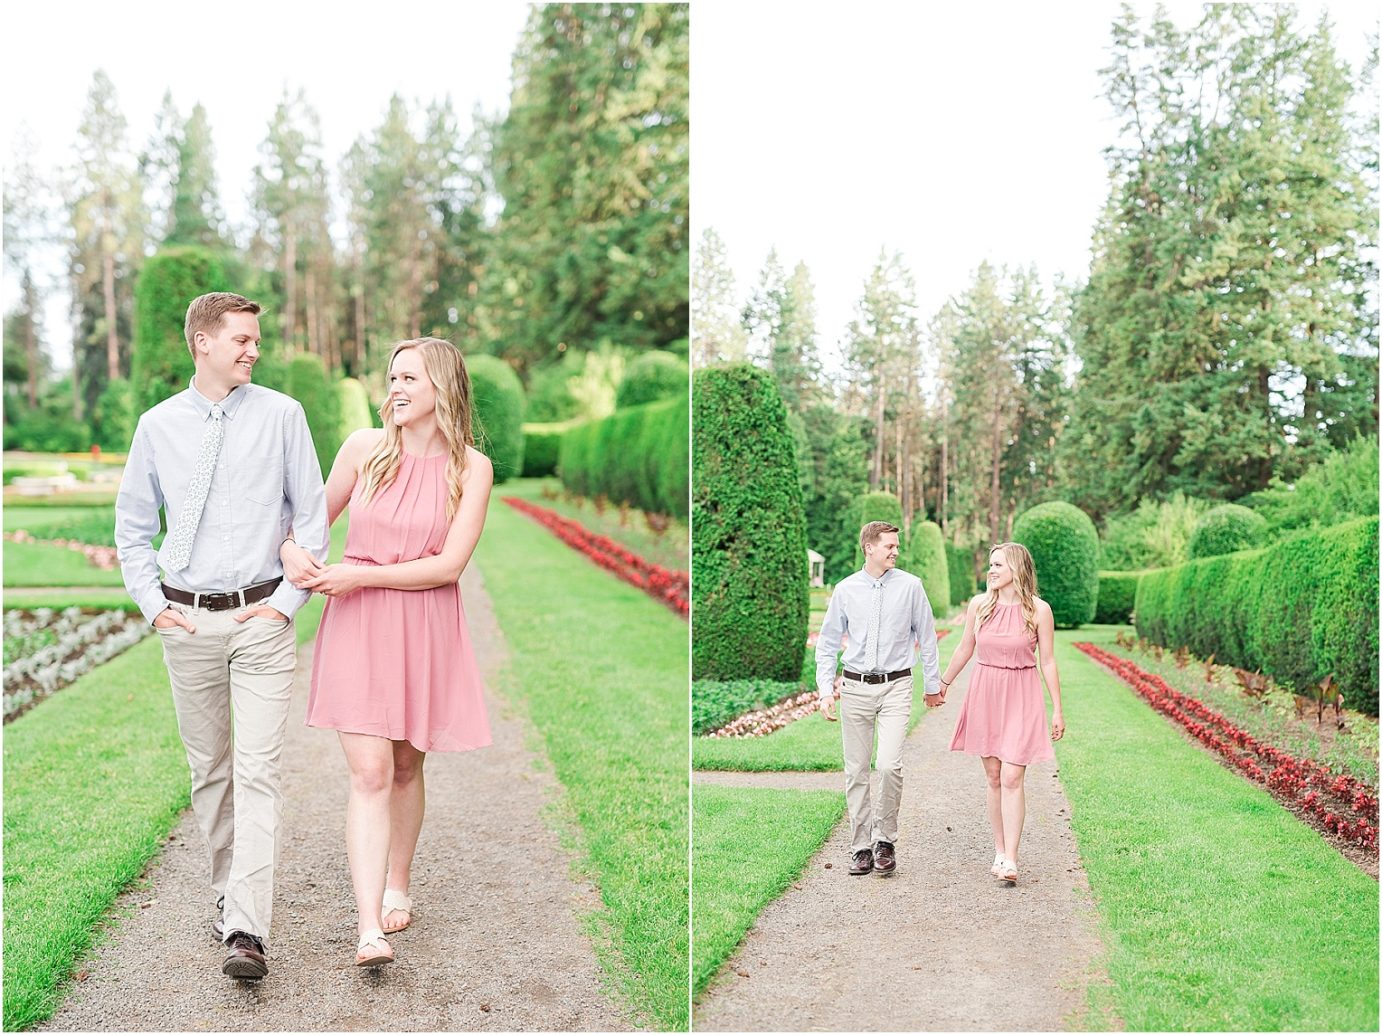 Manito Park Engagement Session Spokane Photographer Bryan and Olivia walking in Duncan Garden